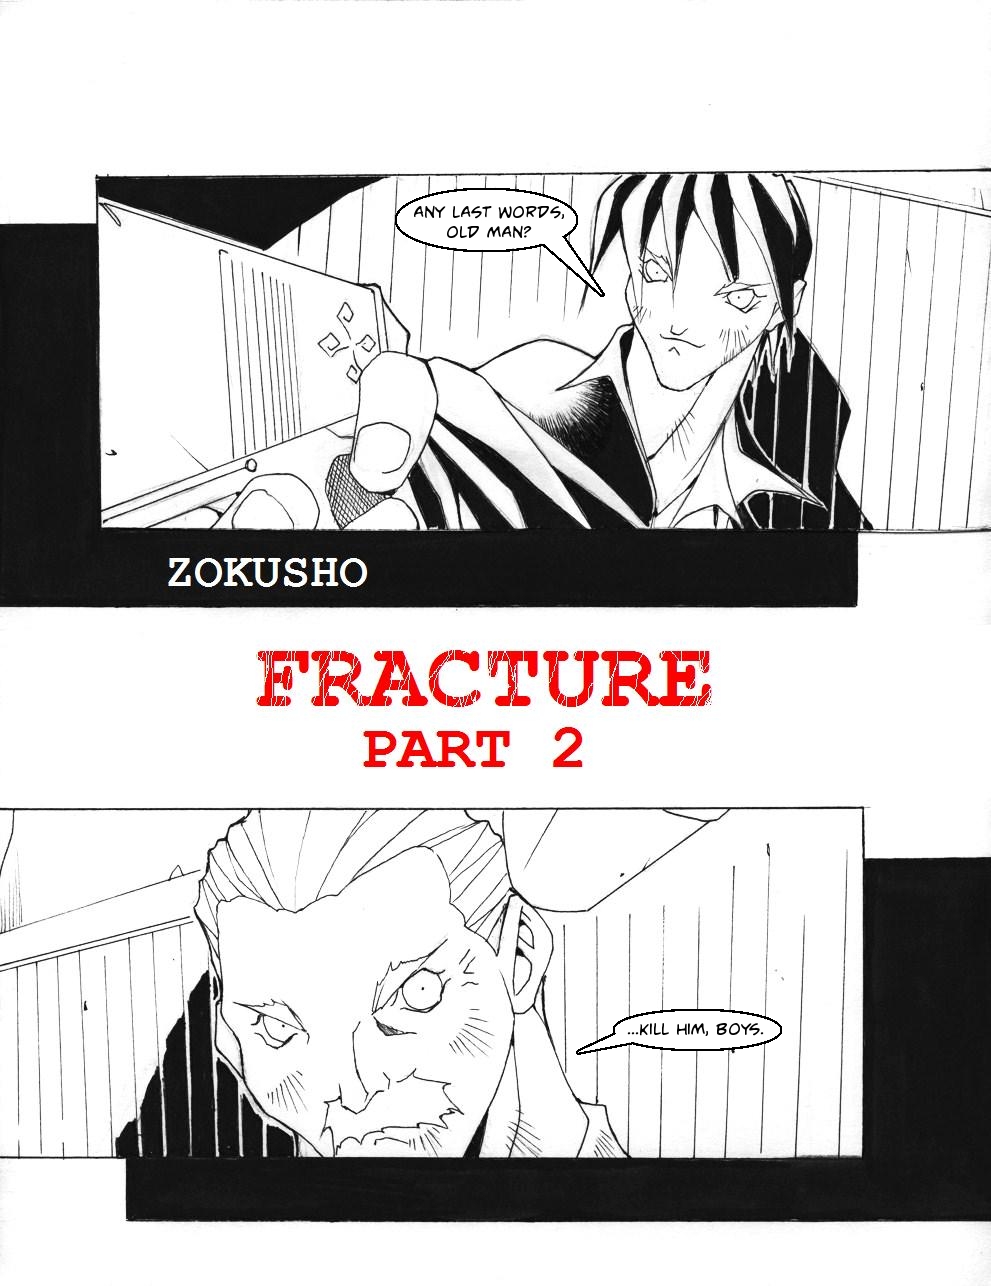 Zokusho: Fracture, Part 2–Page 2